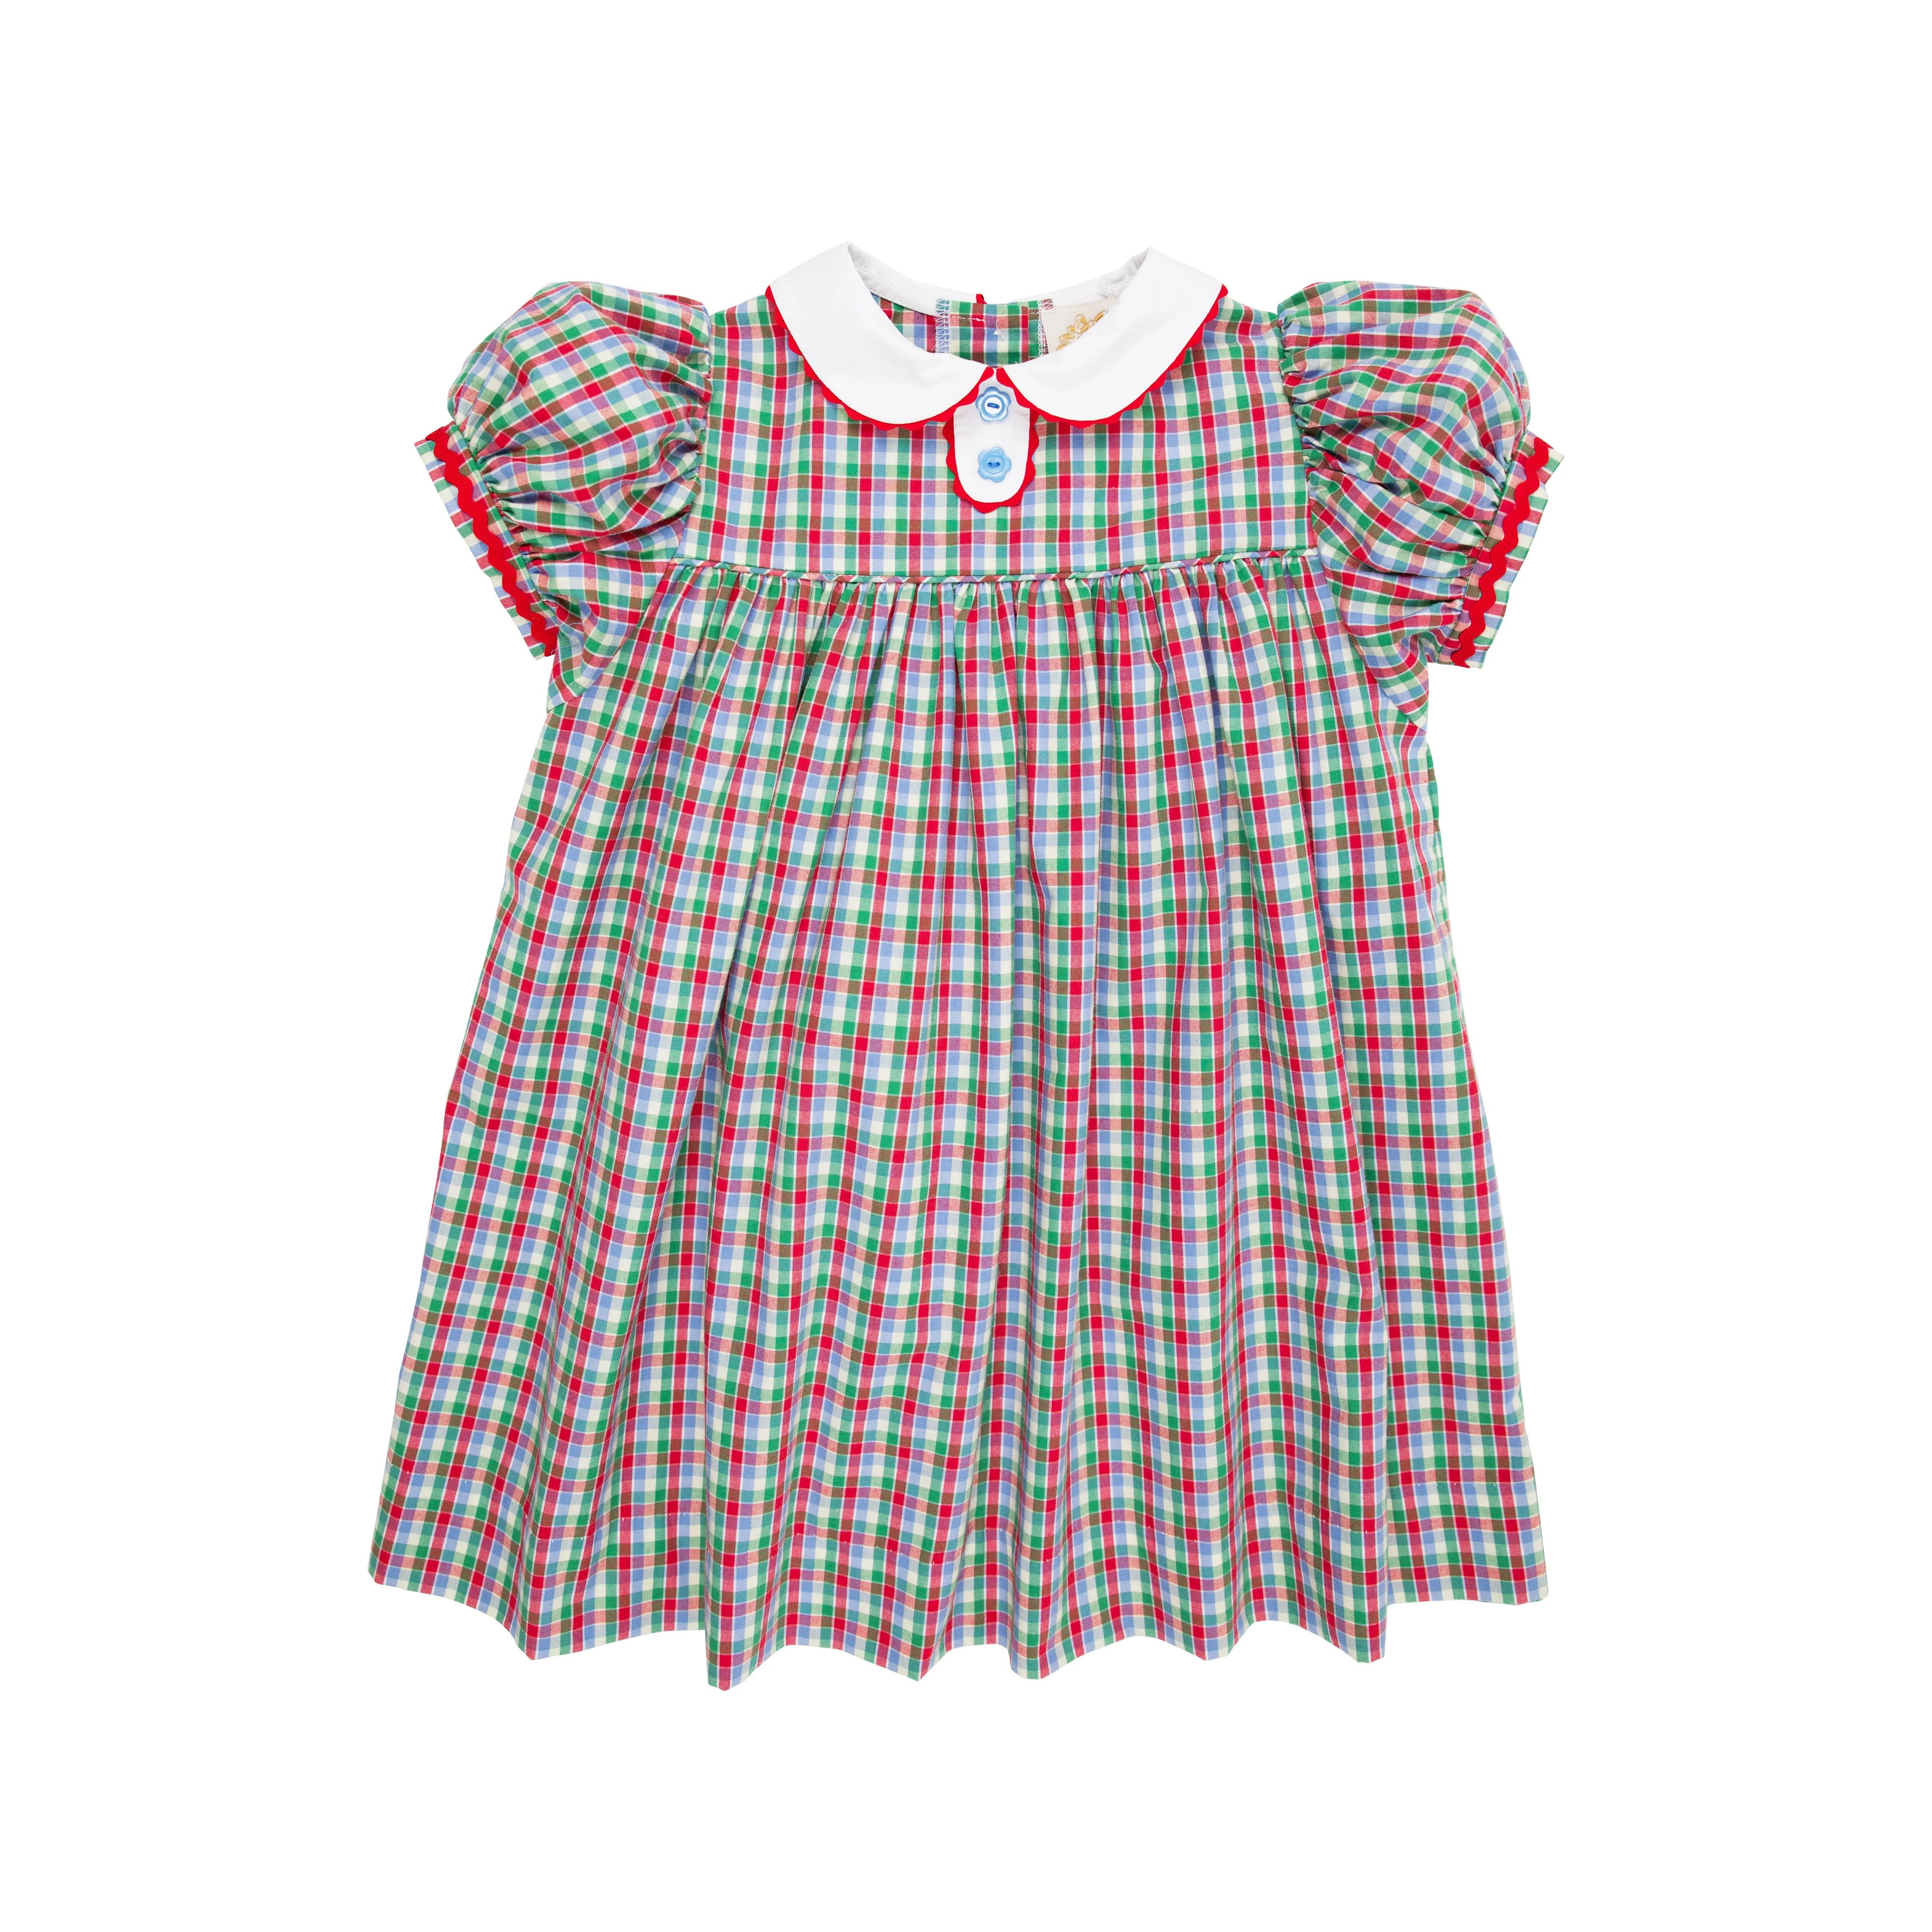 Mary Dal Dress - Miss Porter's Plaid with Richmond Red Ric Rac | The Beaufort Bonnet Company